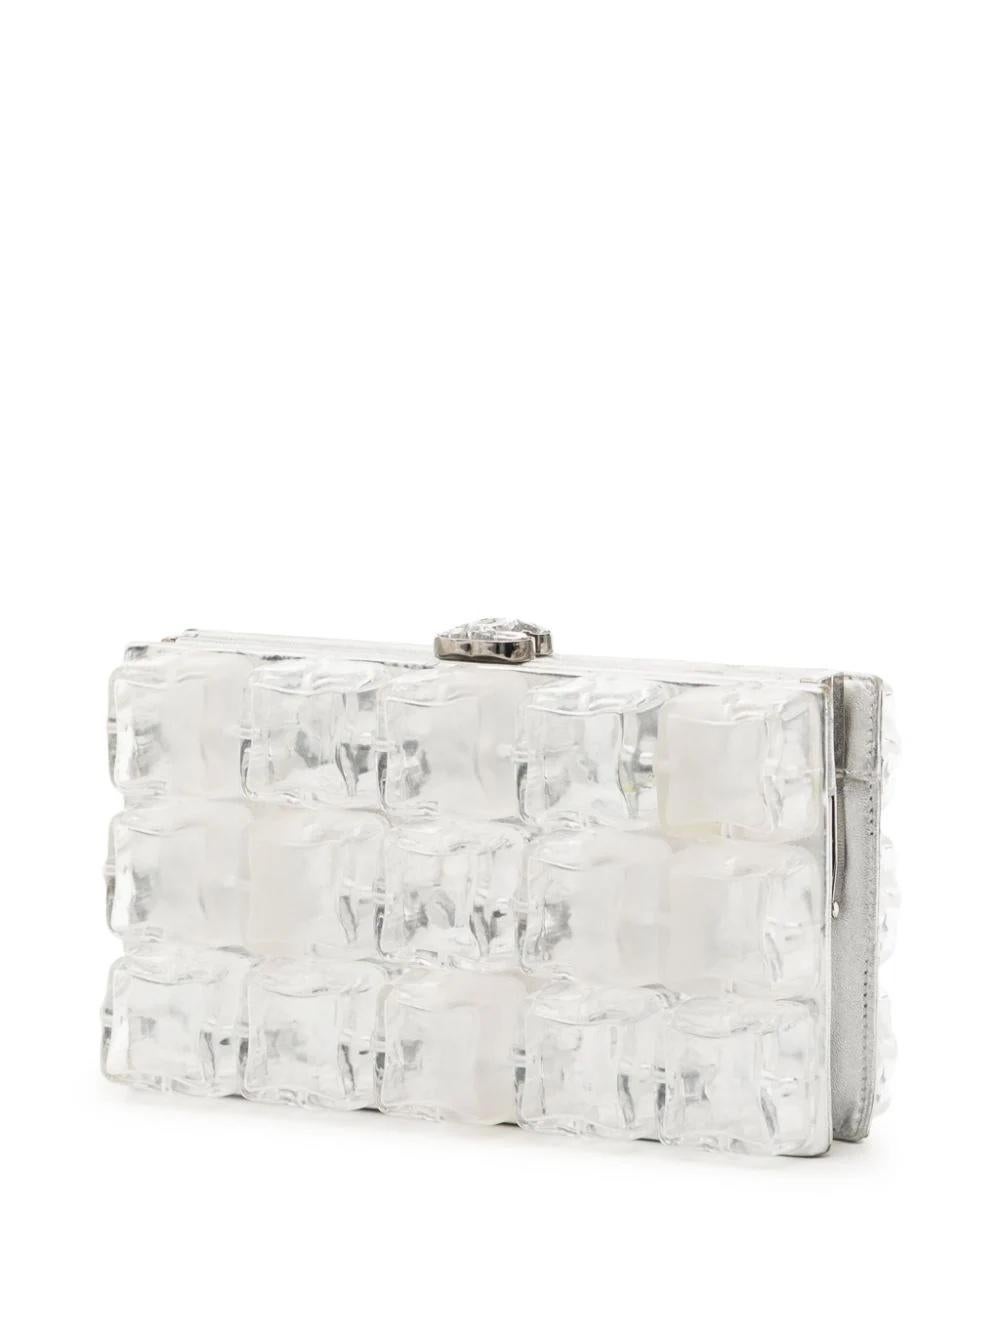 Gray Chanel Fall/Winter 2010 Limited Edition Ice Cube Minaudière For Sale